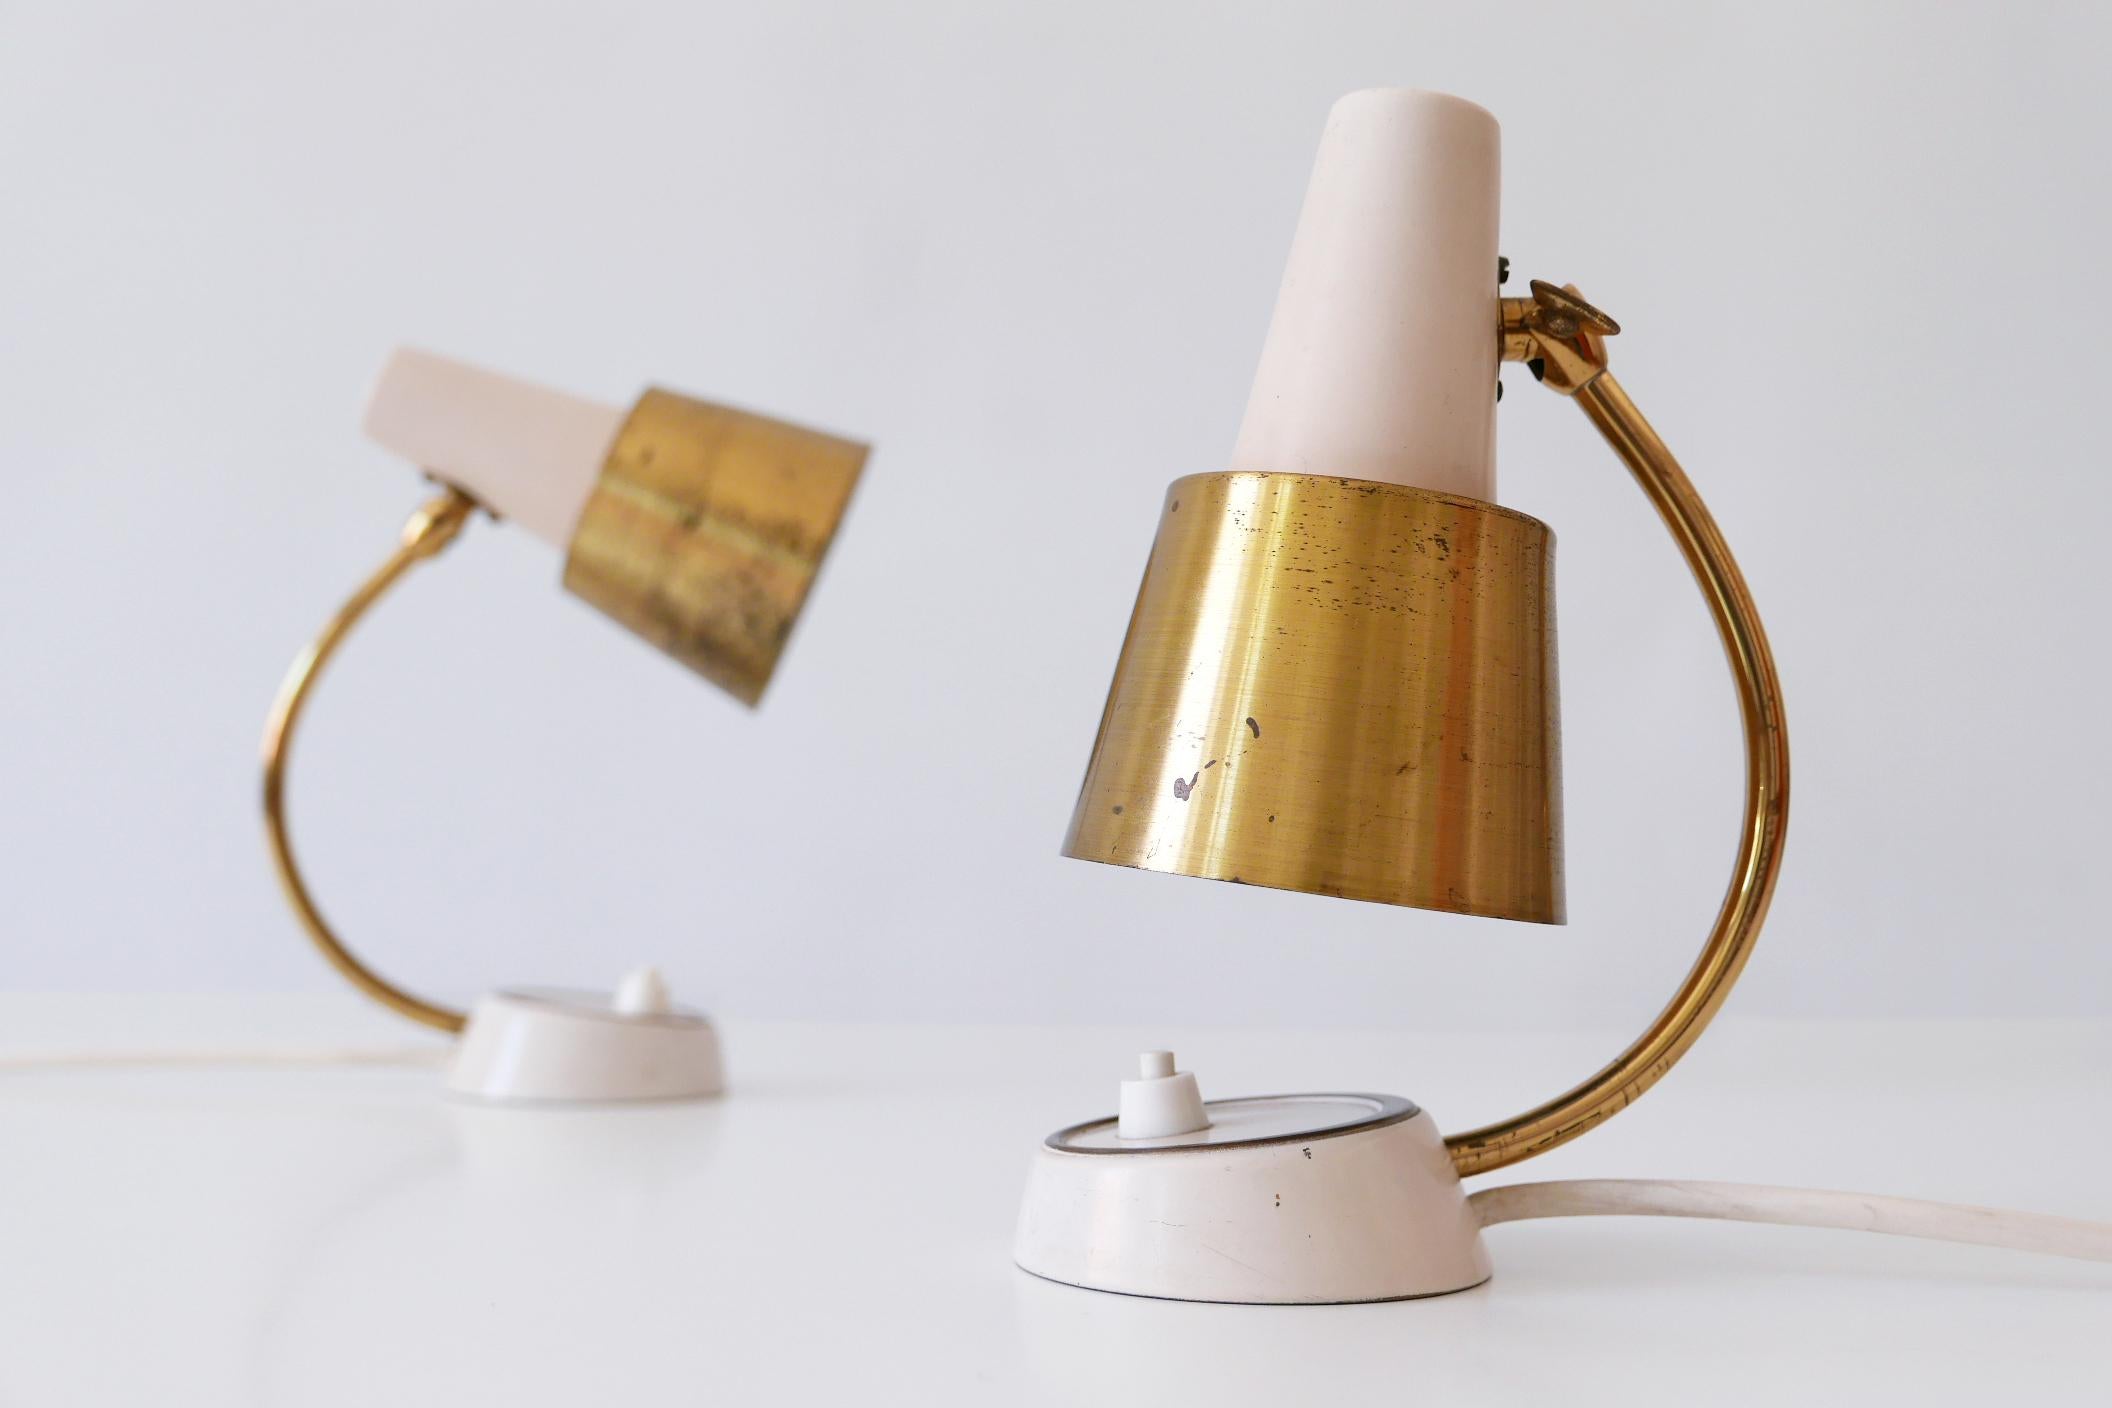 Set of two lovely Mid-Century Modern bedside table lamps or wall lights. Manufactured in 1950s, Germany. They can be used as well bedside table lamps as wall lamps.

Executed in brass sheet and tube, each lamp comes with 1 x E14 / E12 Edison screw